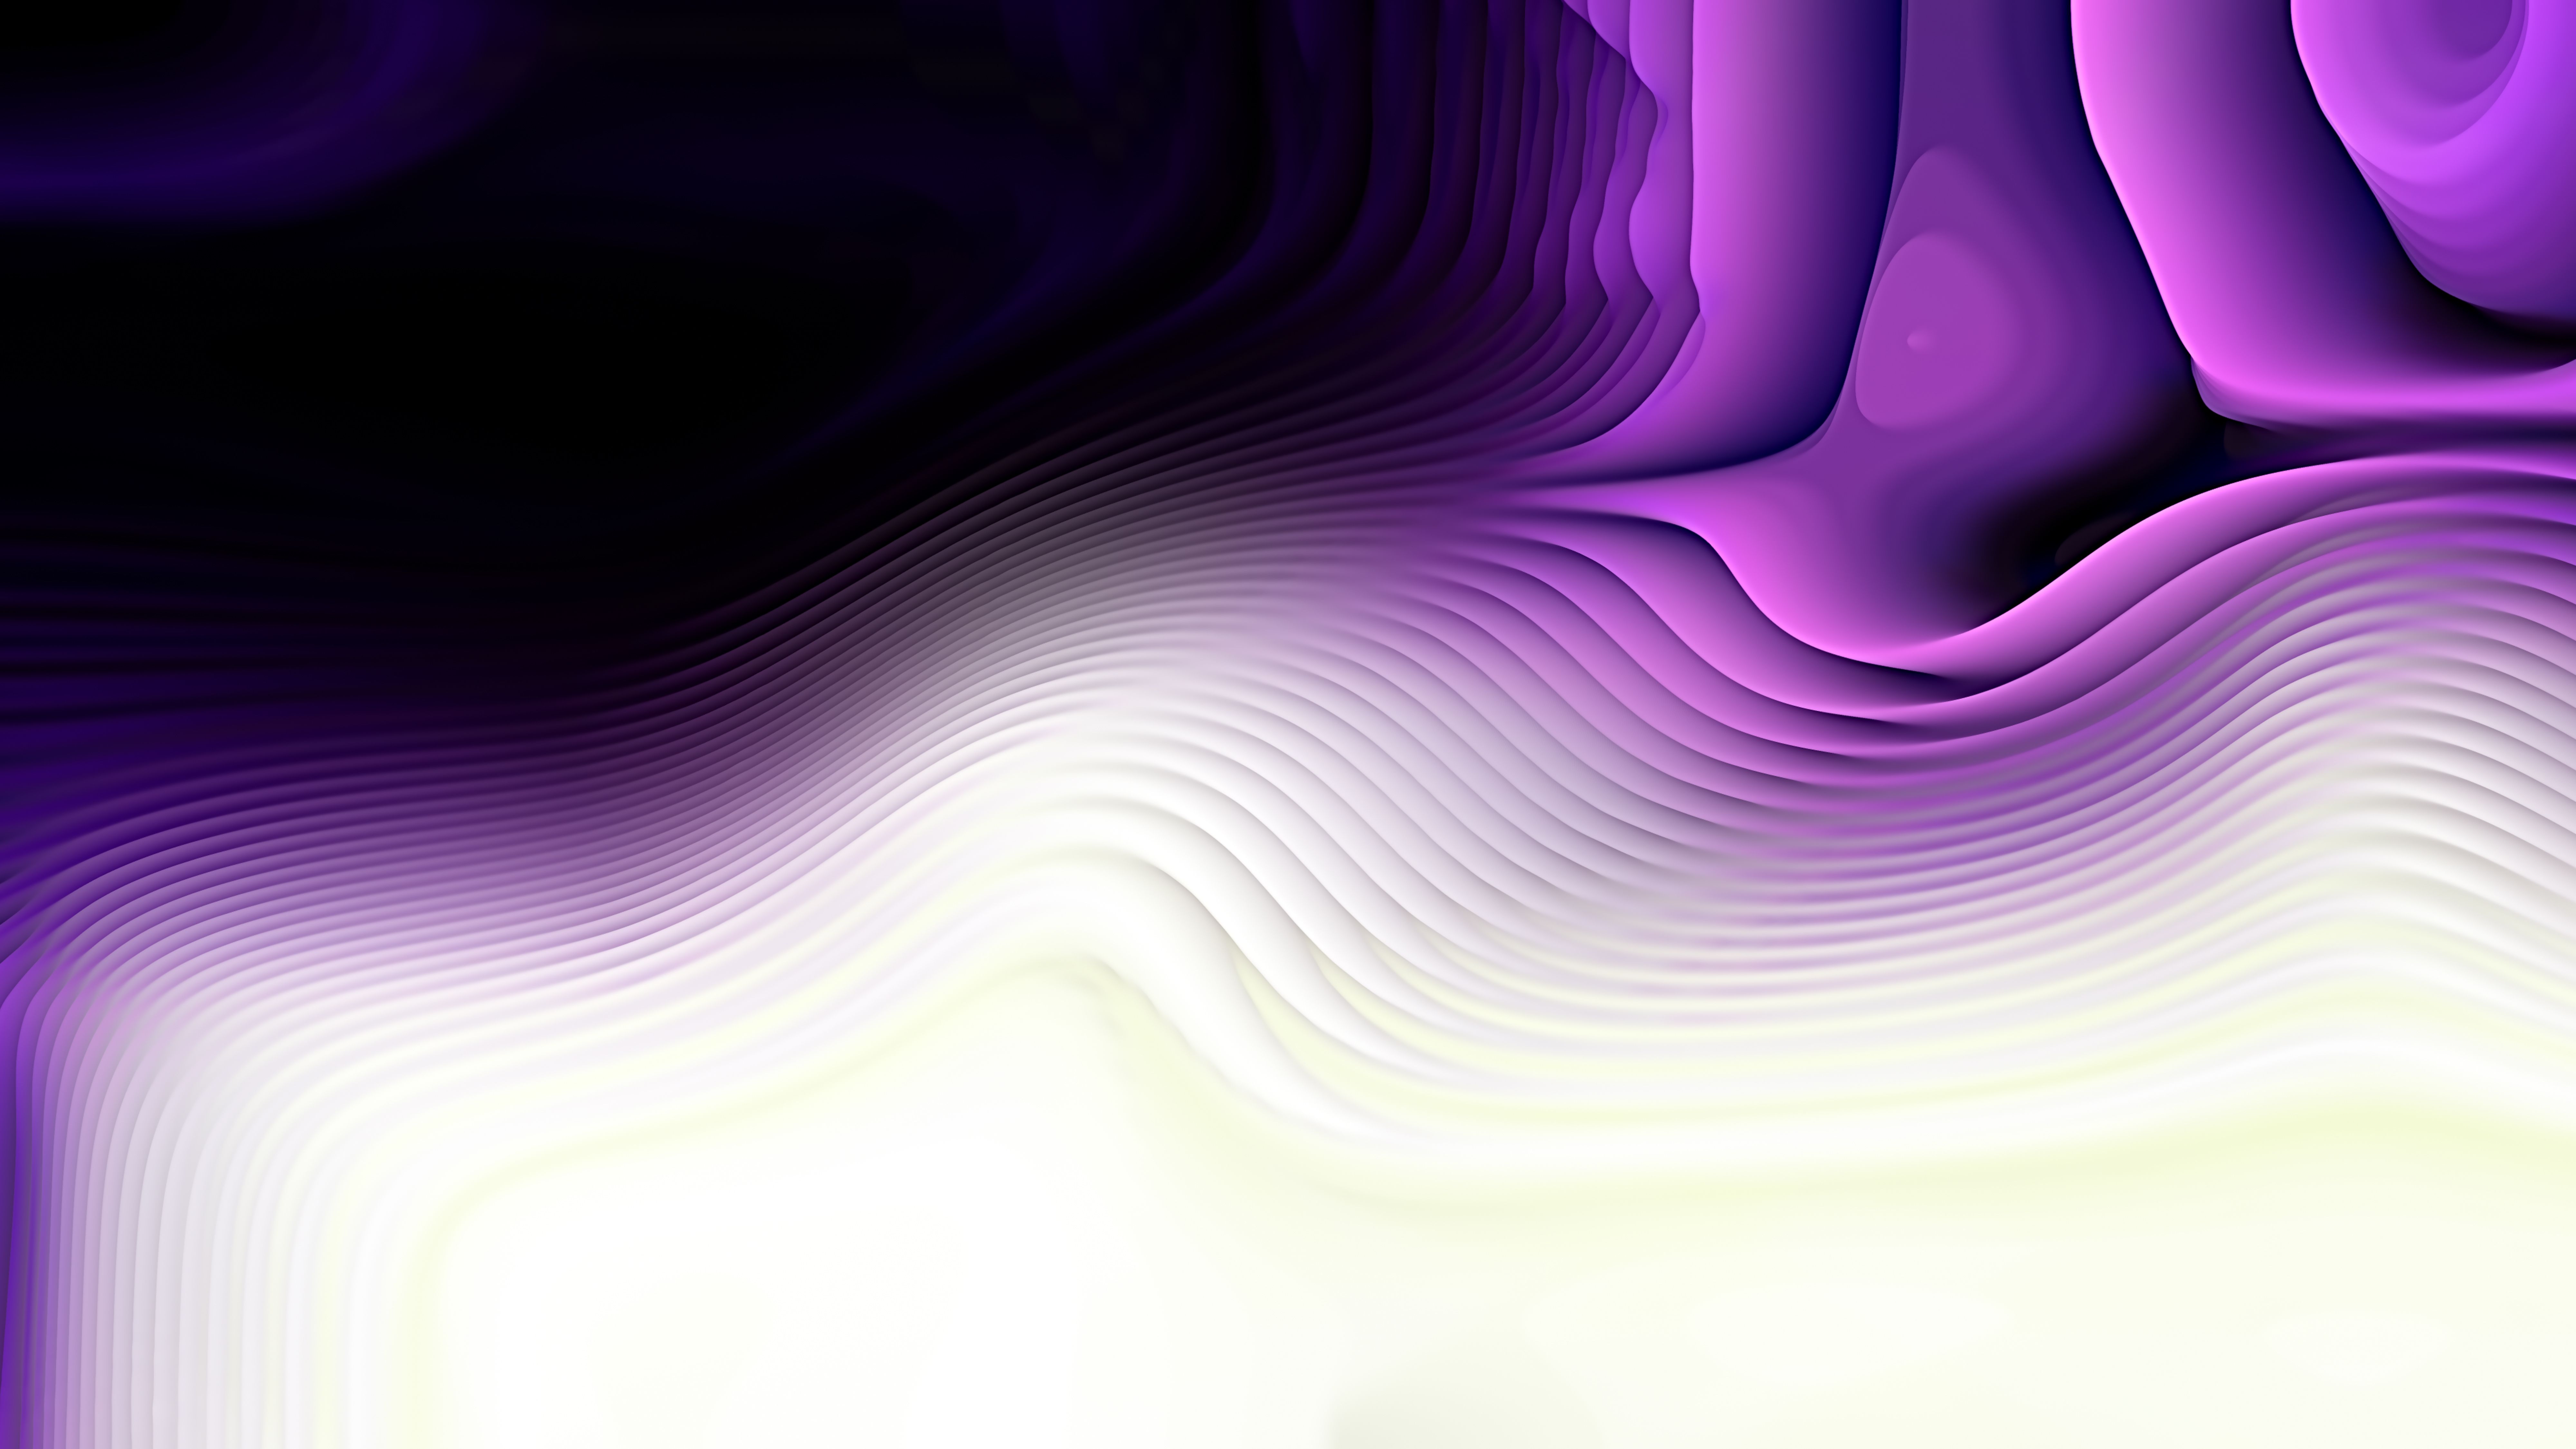 Abstract 3D Purple Black and White Curved Lines Texture Background